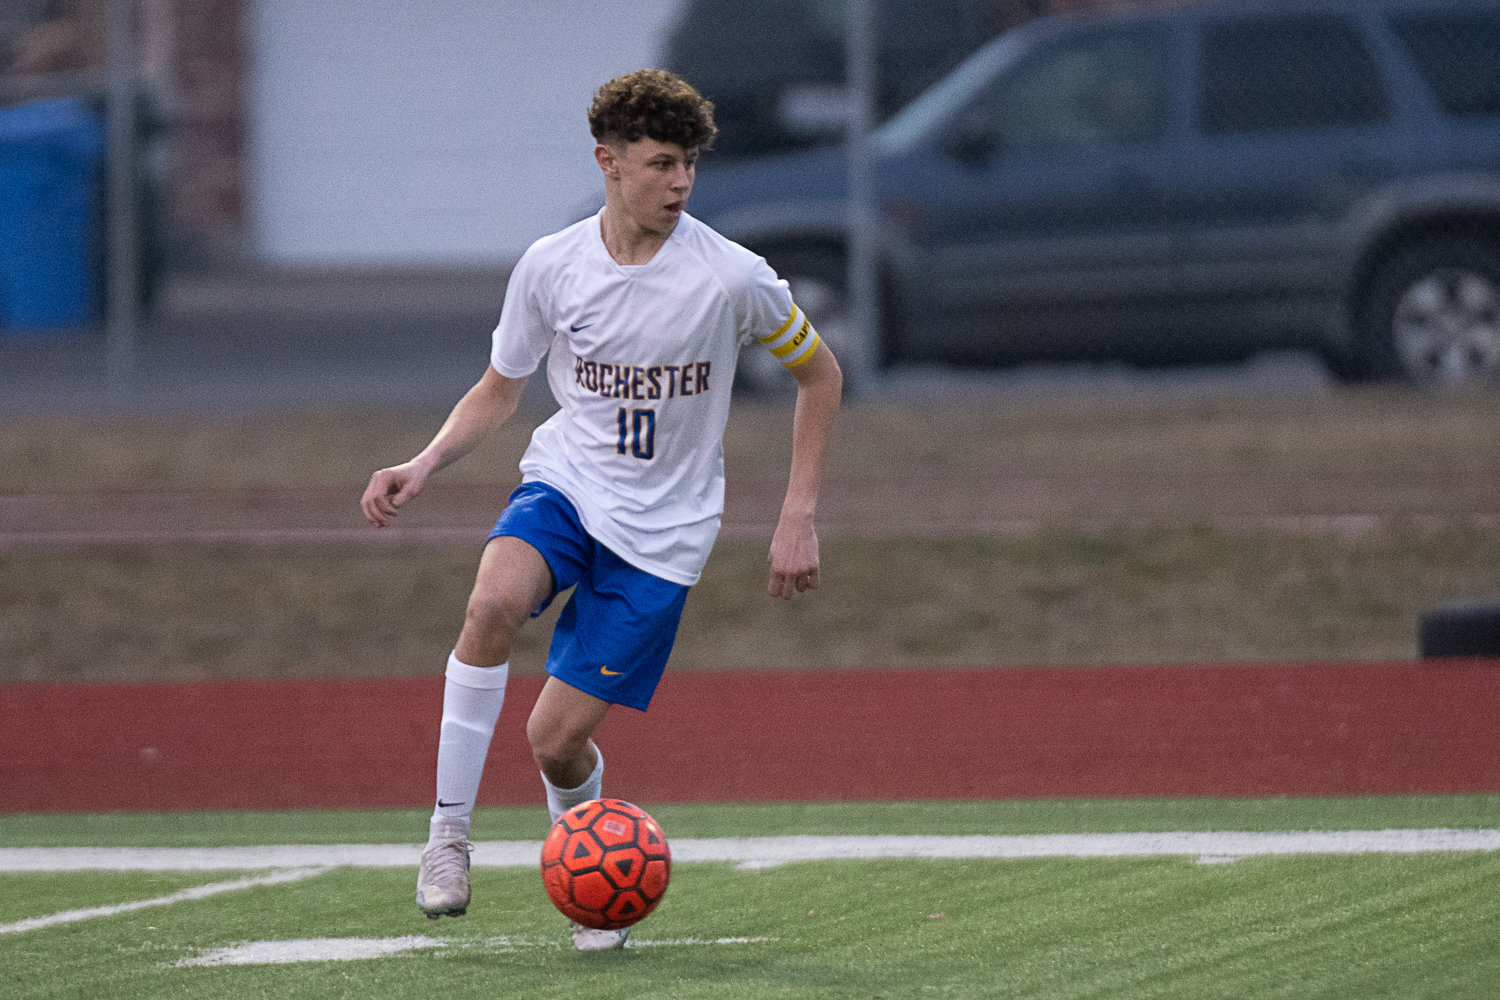 Gabriel Fernandez Sales takes the ball in possession during the first half of Rochester's match at Centralia on March 17.